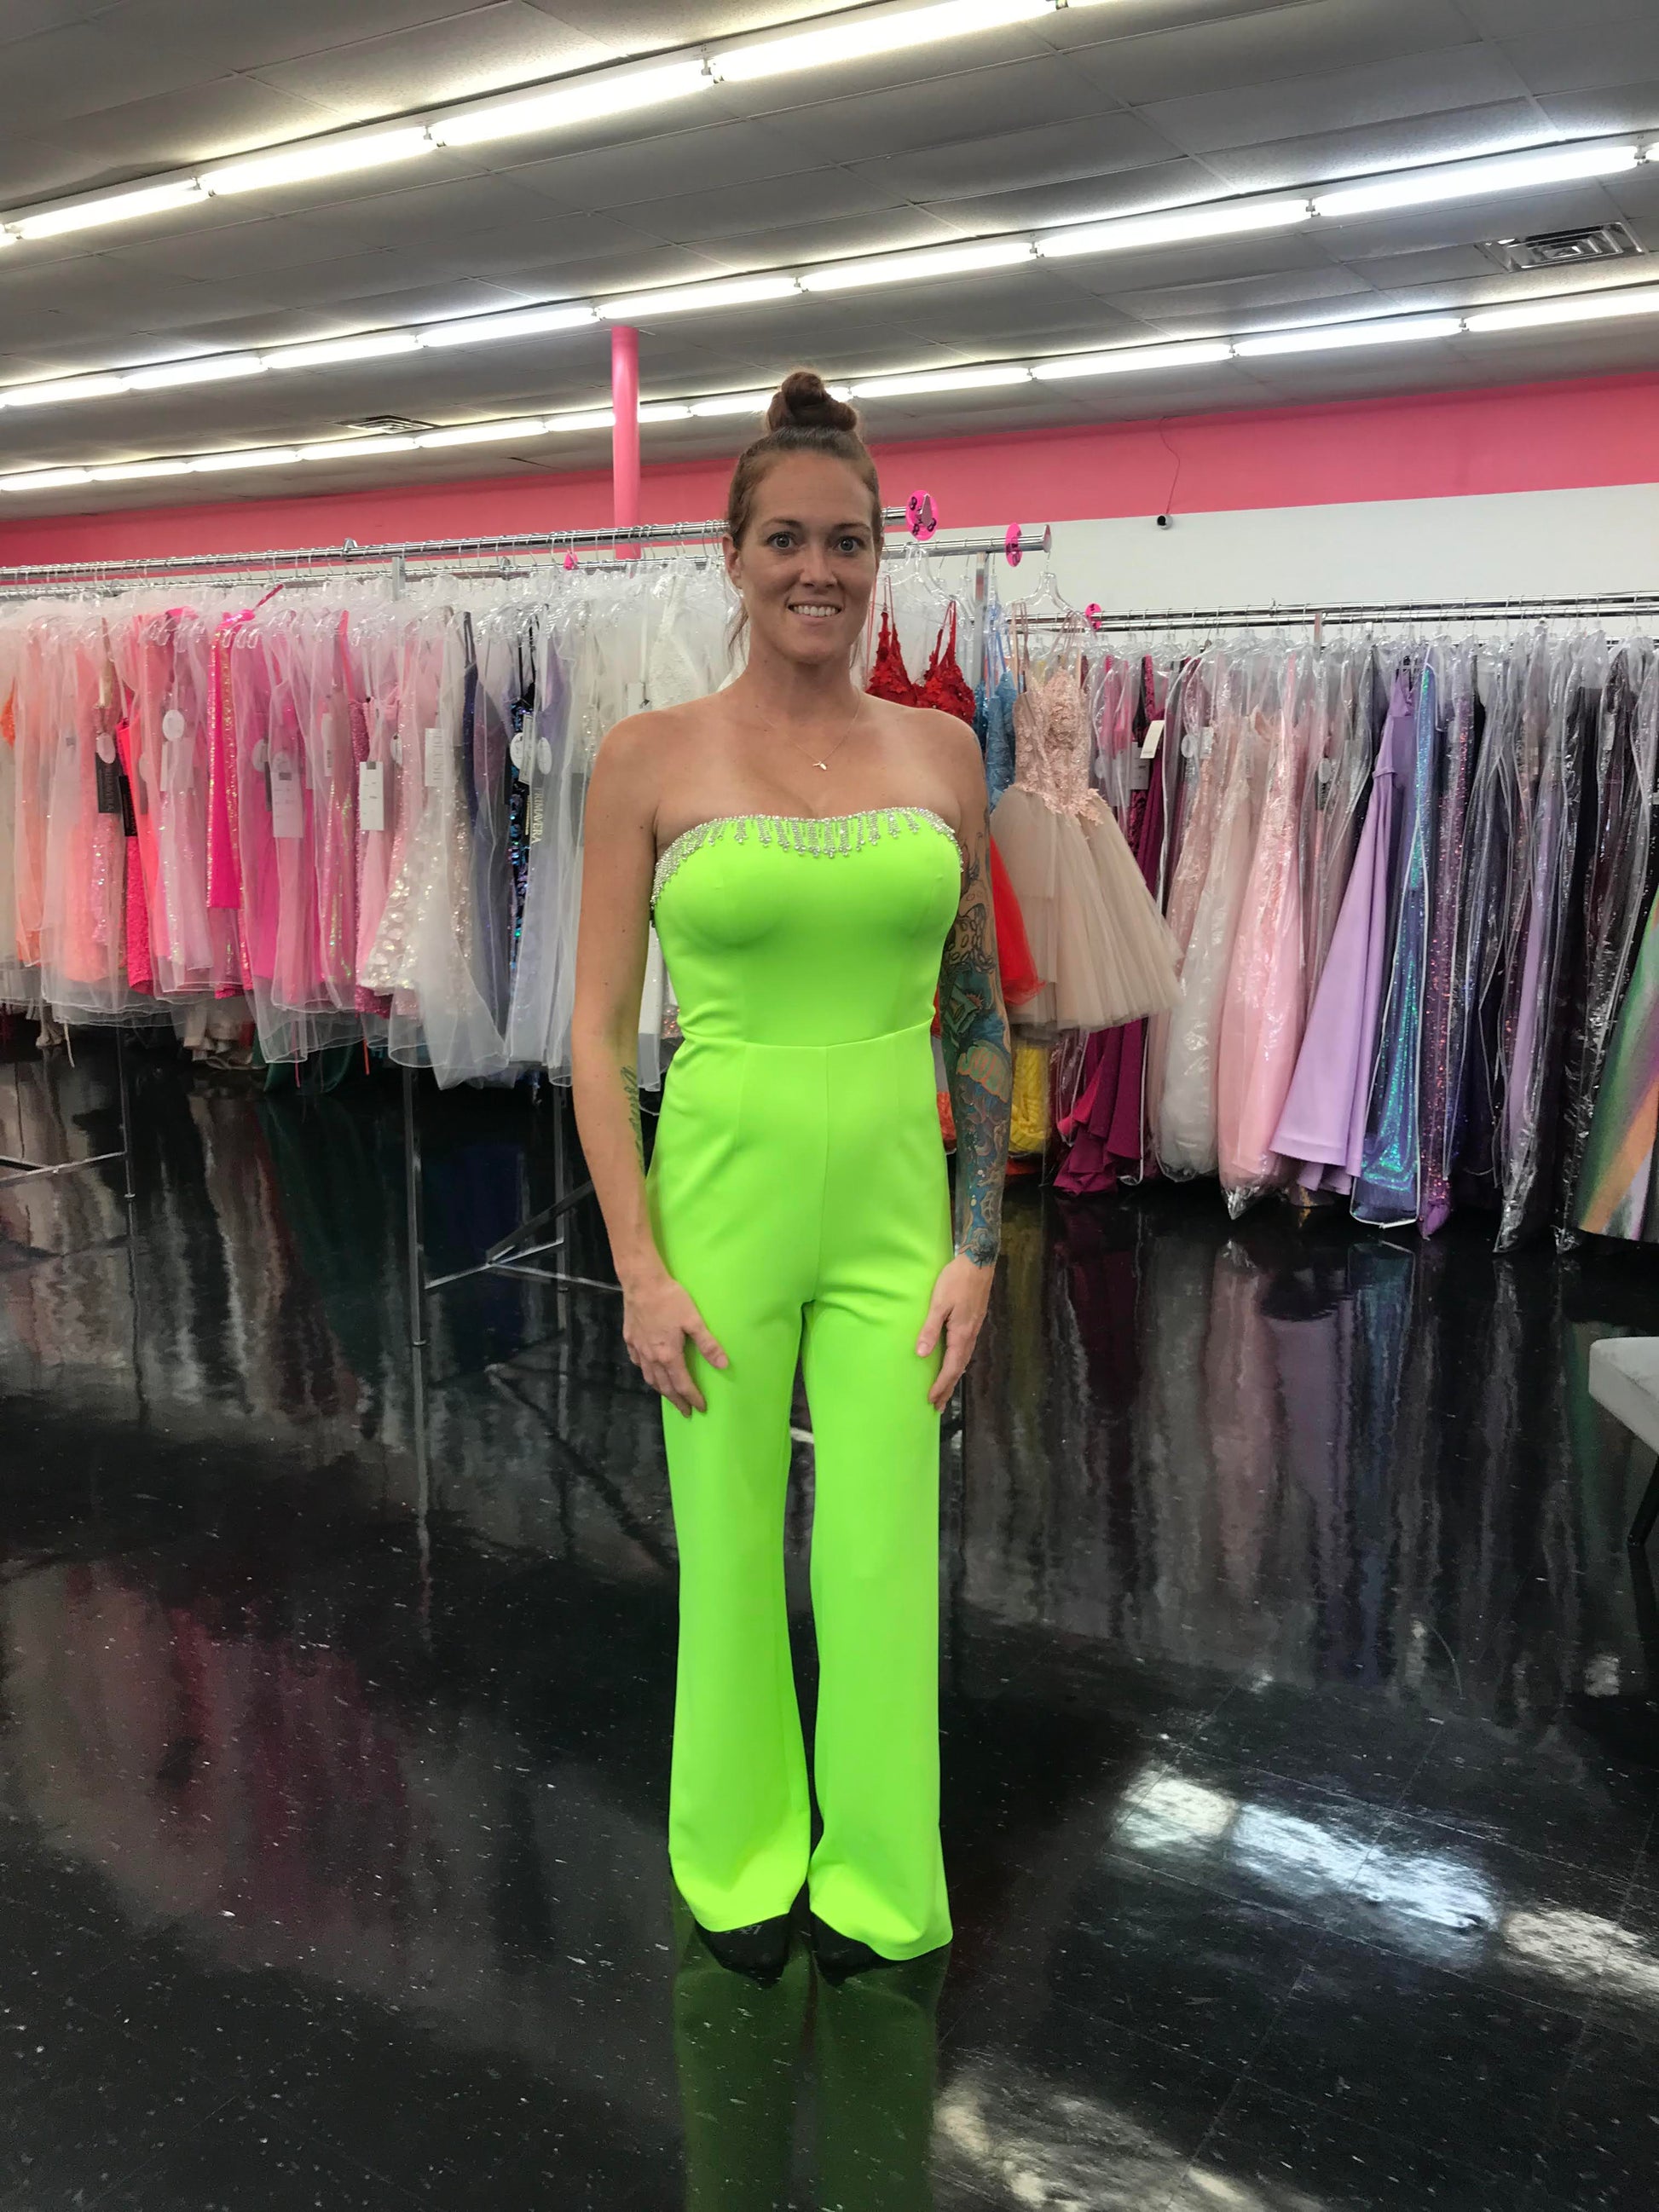 Marc Defang 8180 Long Scuba Strapless Jumpsuit Crystal Fringe Tassel Pageant Neon  Available Size:  0, 10  Available Color:  Neon Green